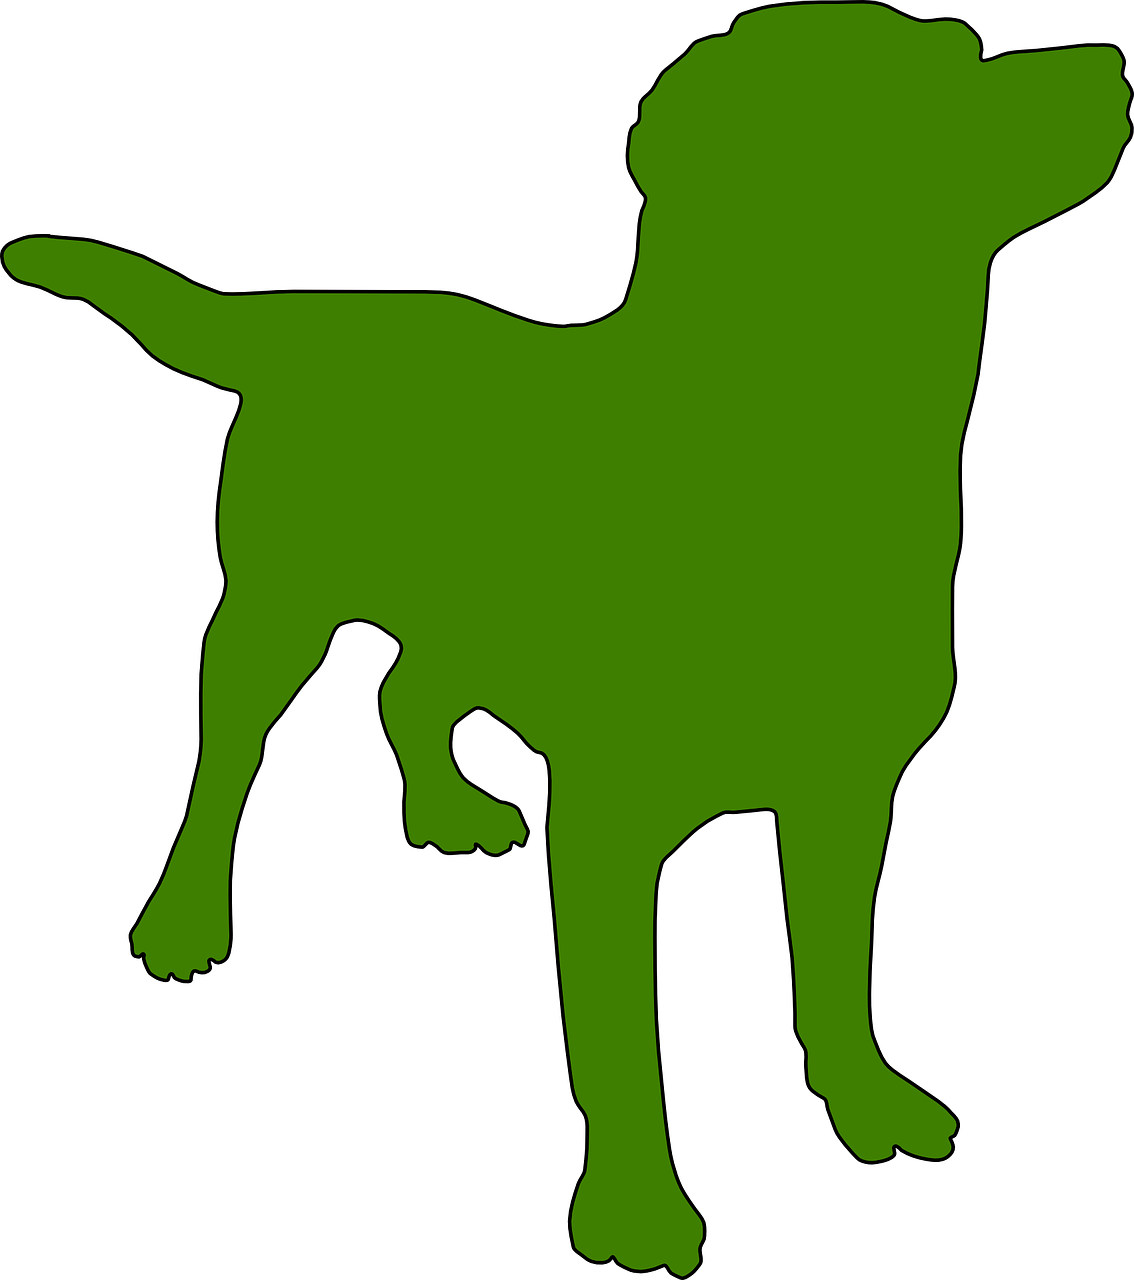 Earth Day Tips For Earth-friend Dog Owners - Dog Silhouette .png (1134x1280)